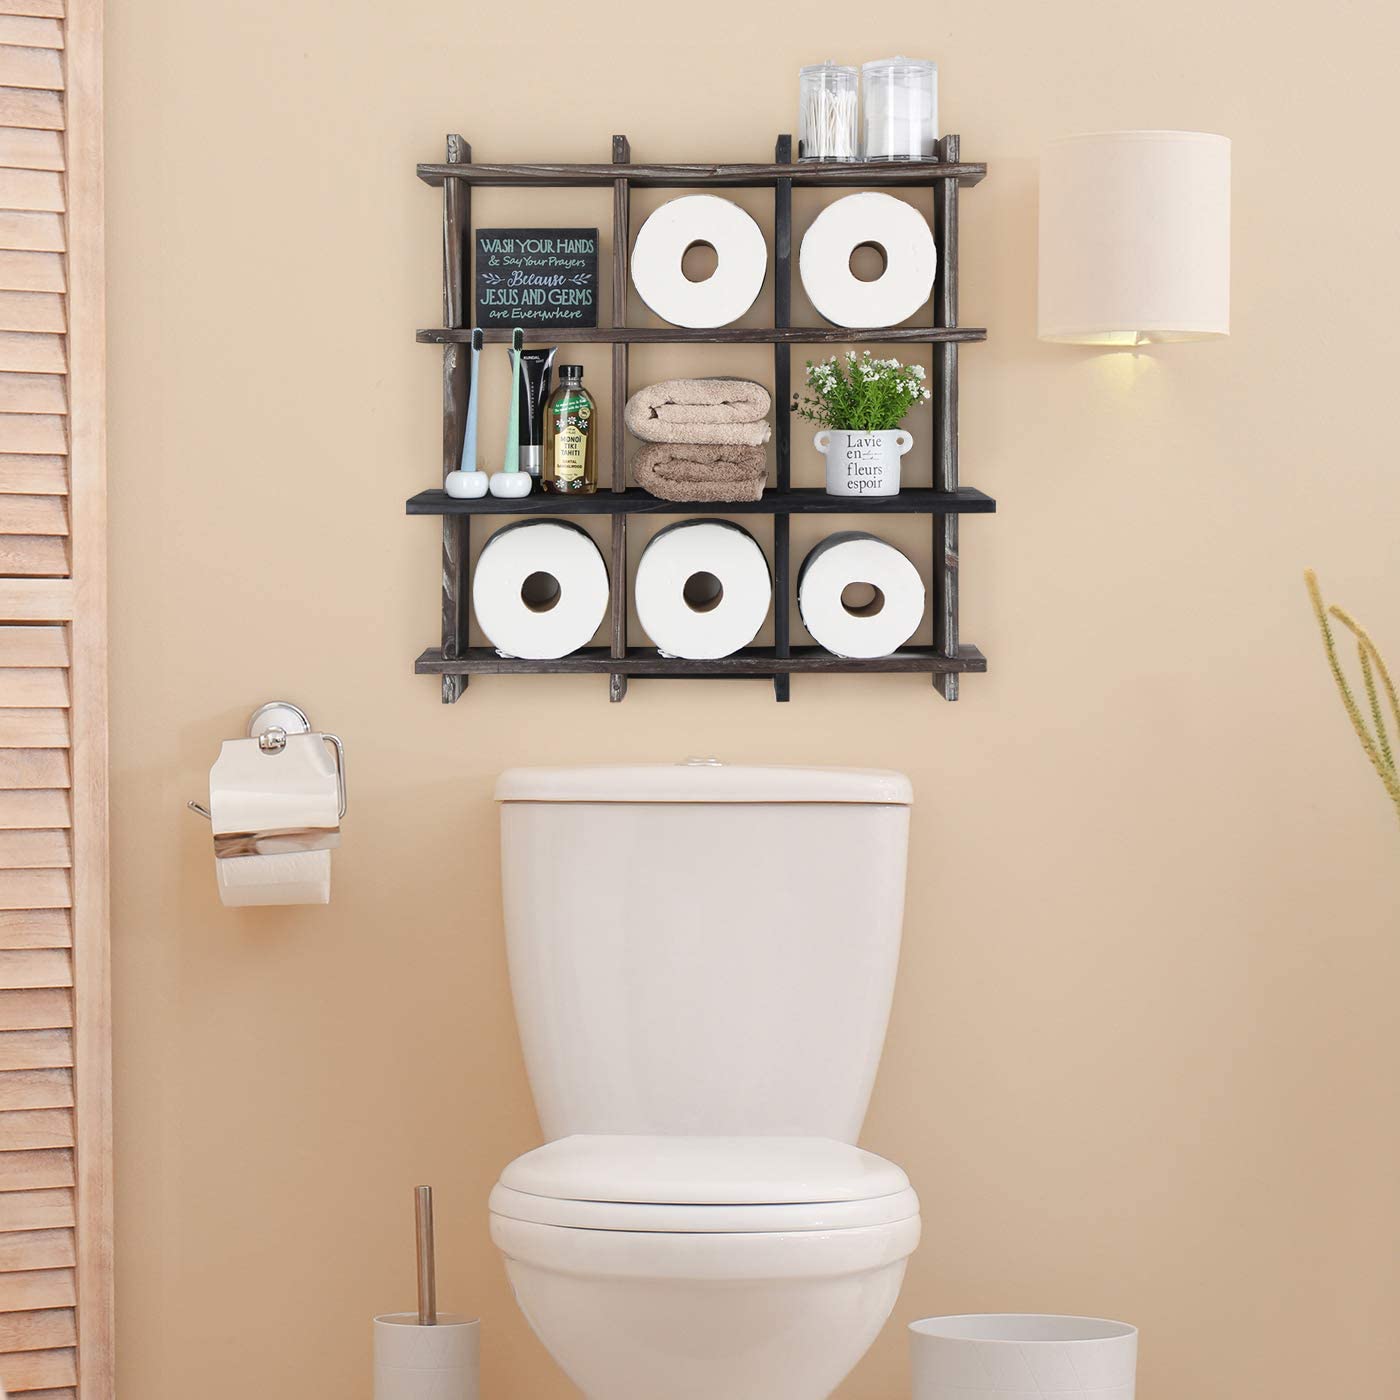 Big square storage divided into nine small squares full of essentials above toilet seat